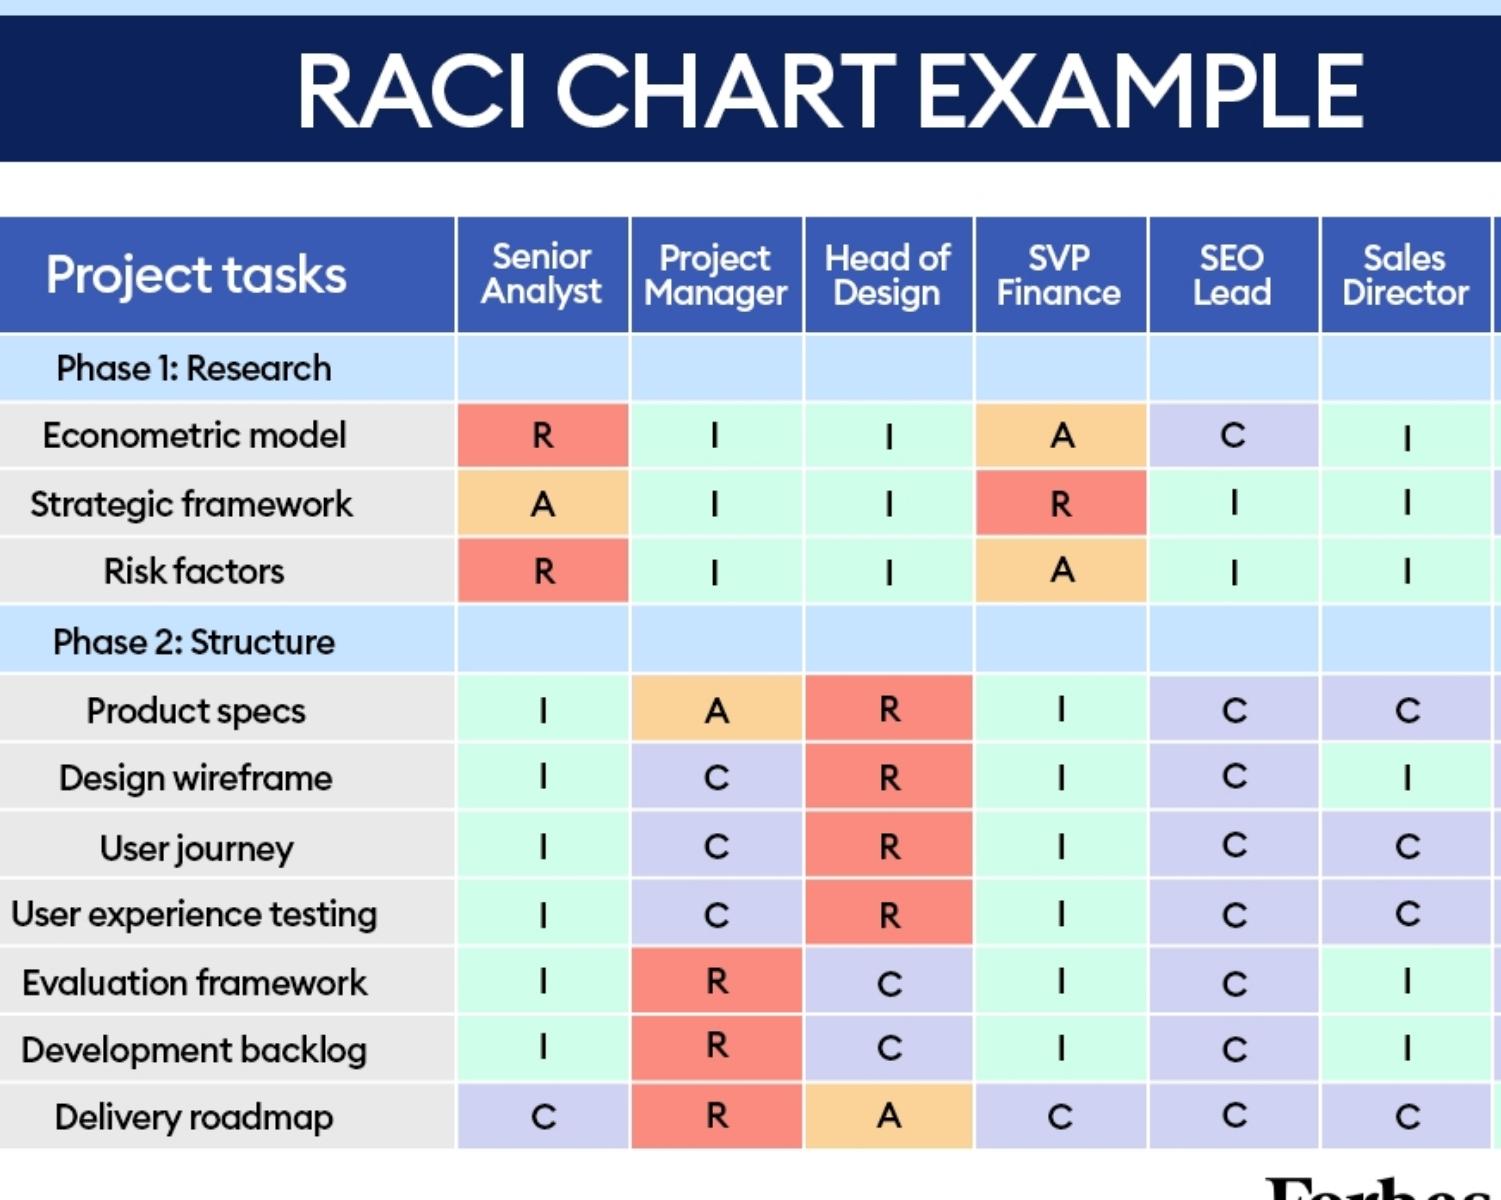 What are the RACI Roles?